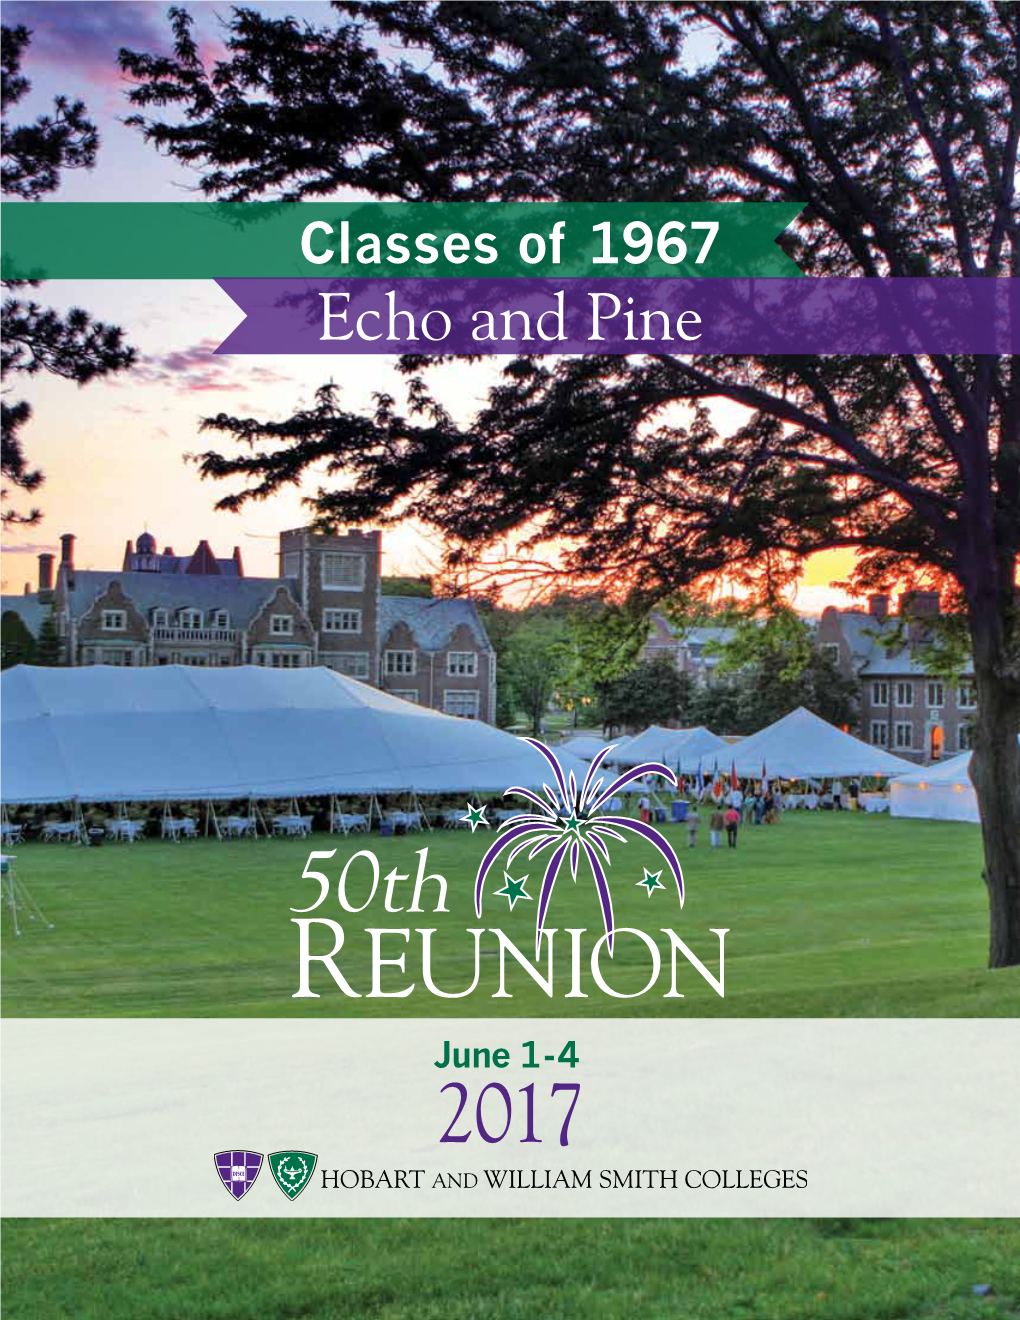 Classes of 1967 Echo and Pine